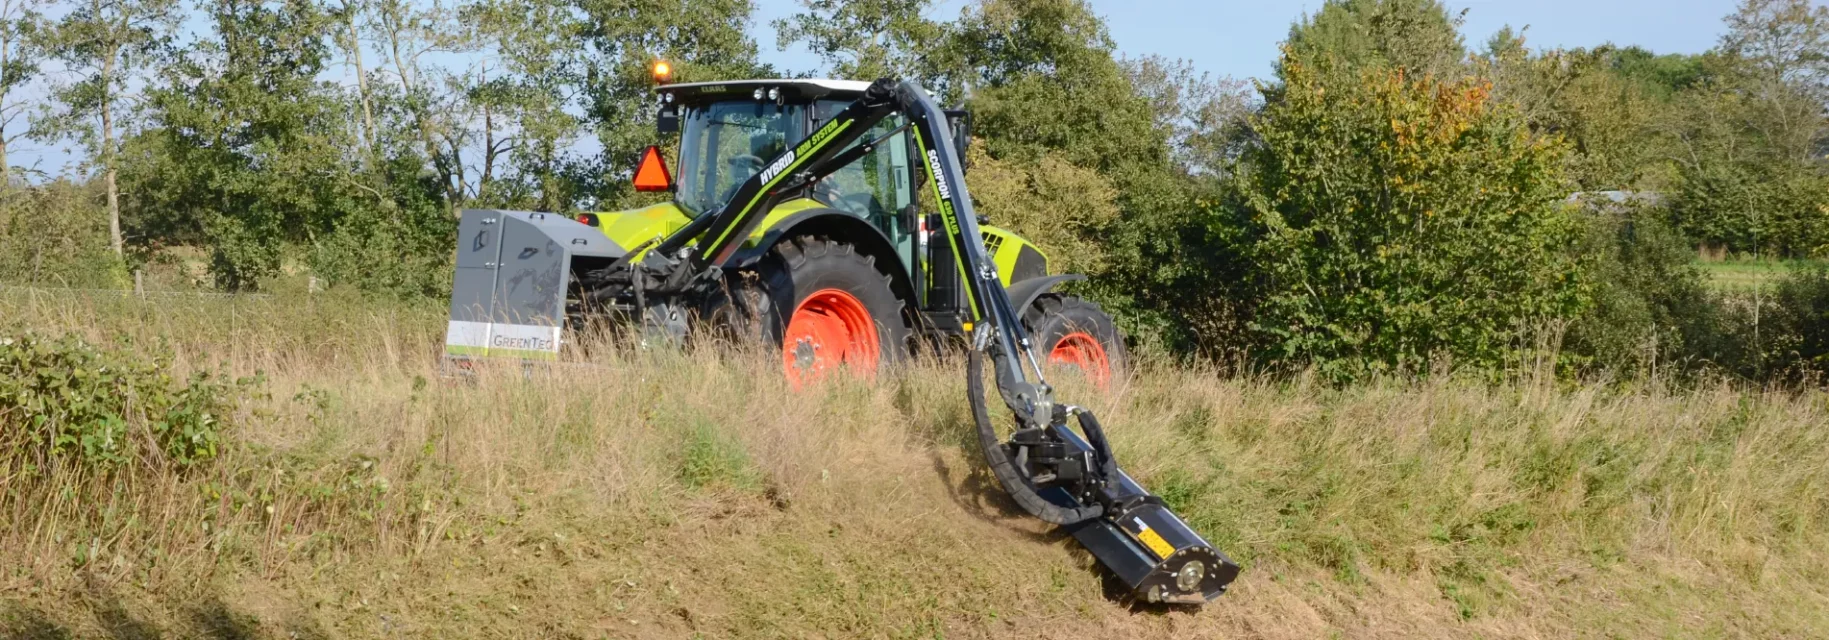 Ditch mower attachment for tractor